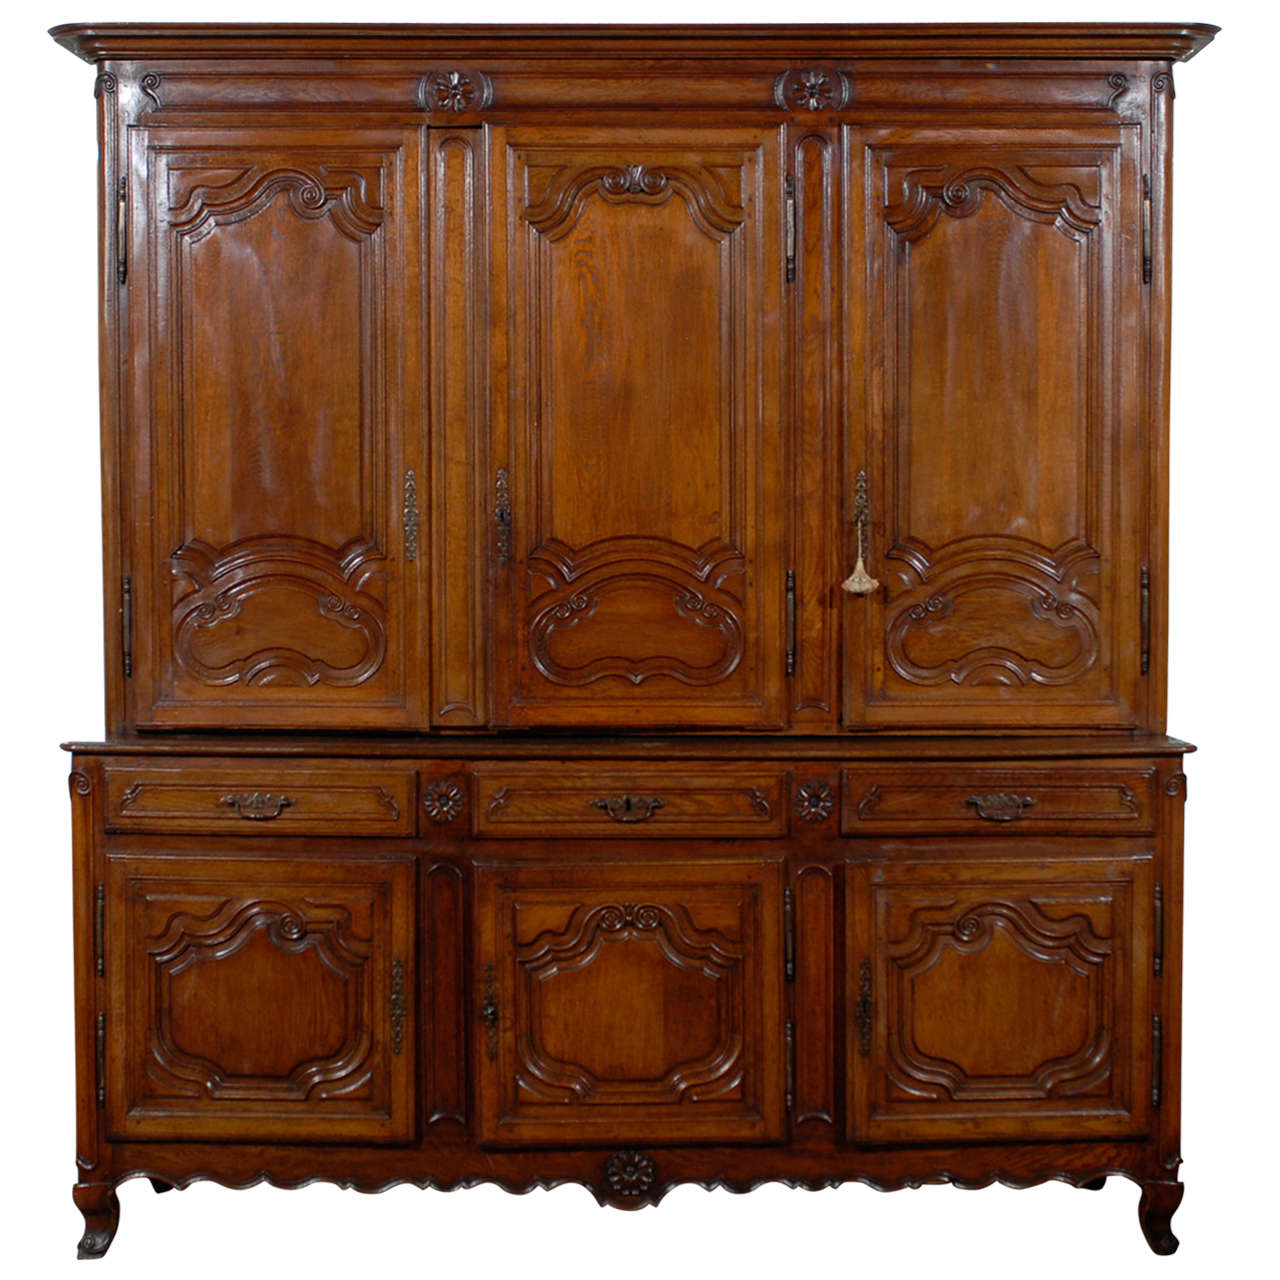 French, 1750 Period Louis XV Large Two-Part Wooden Cabinet from Lorraine Region